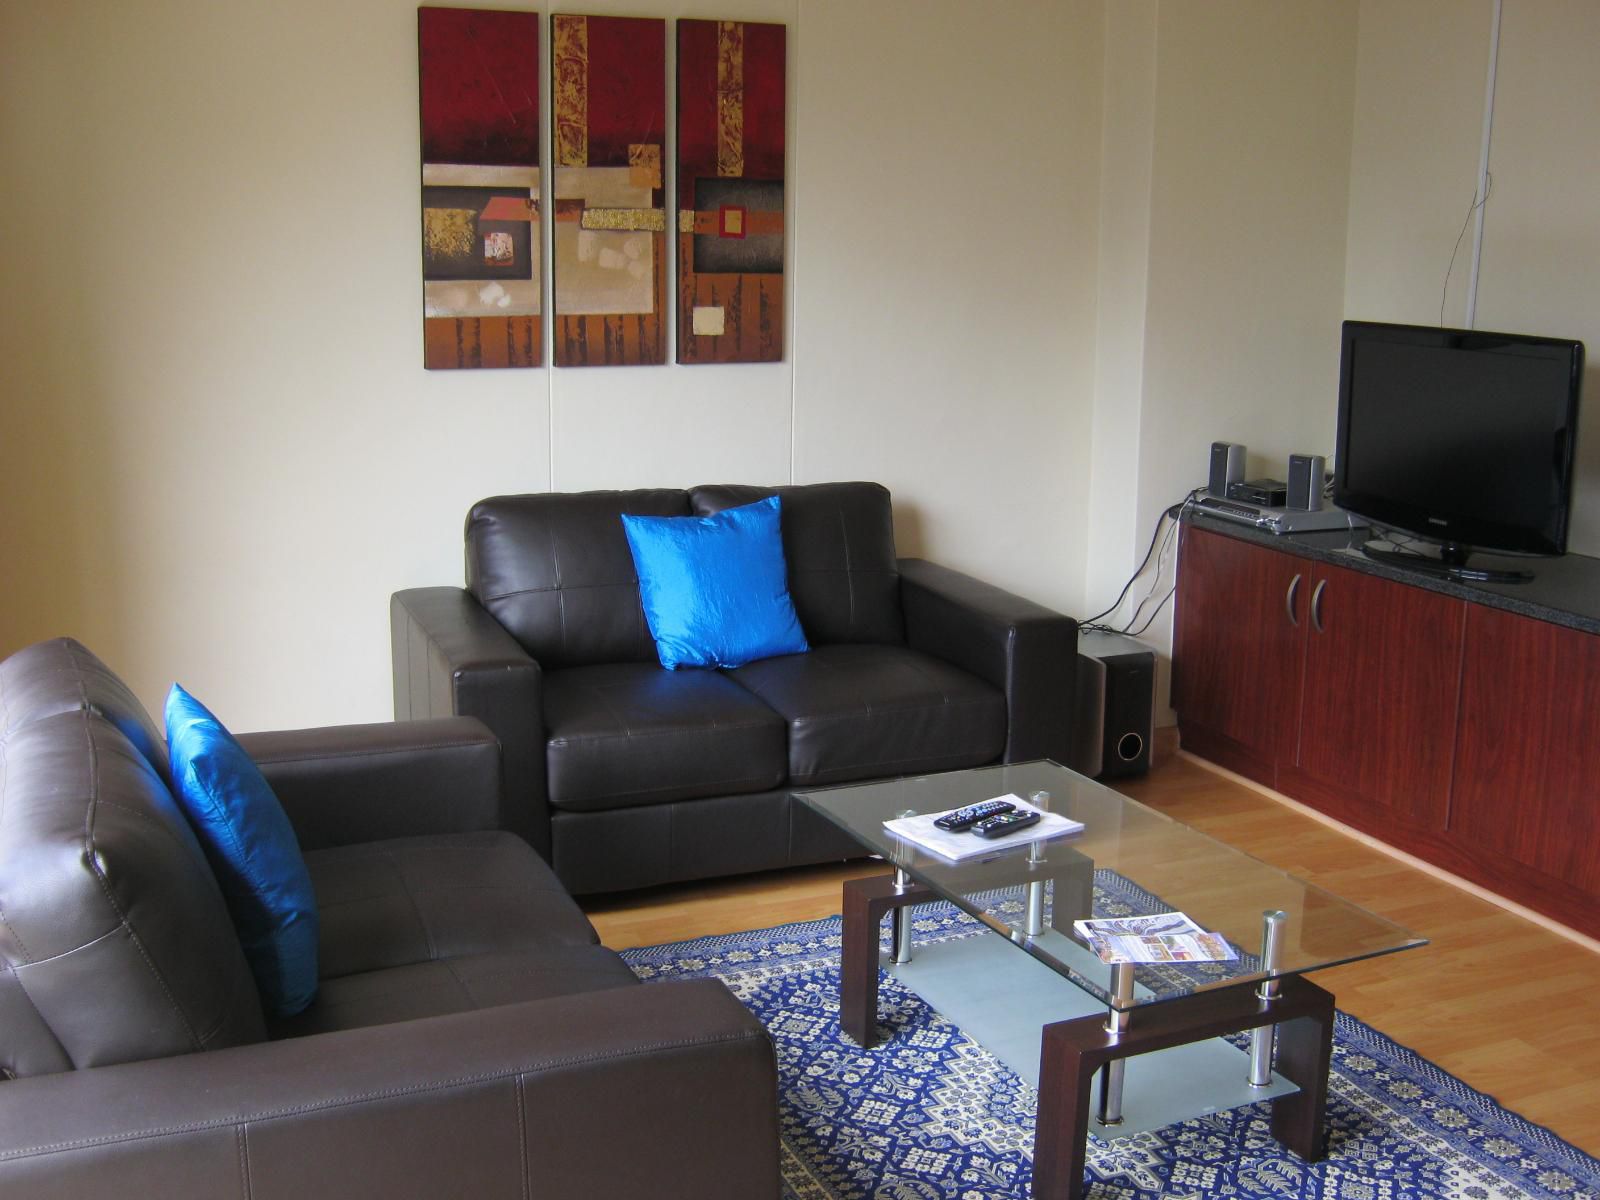 Majorca Self Catering Apartments Century City Cape Town Western Cape South Africa Living Room